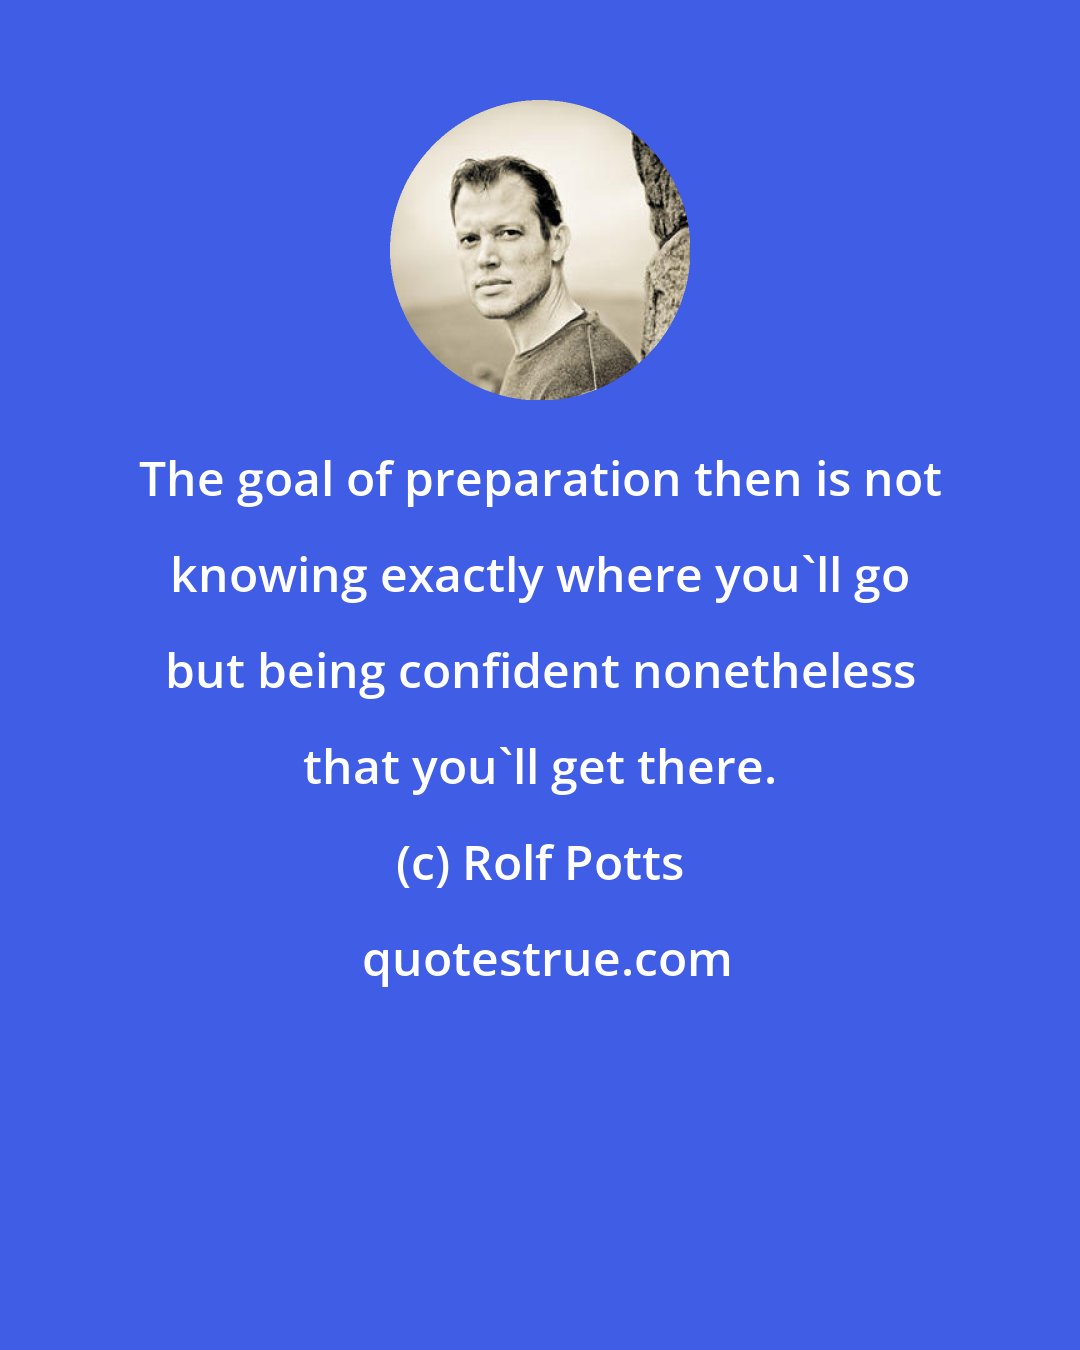 Rolf Potts: The goal of preparation then is not knowing exactly where you'll go but being confident nonetheless that you'll get there.